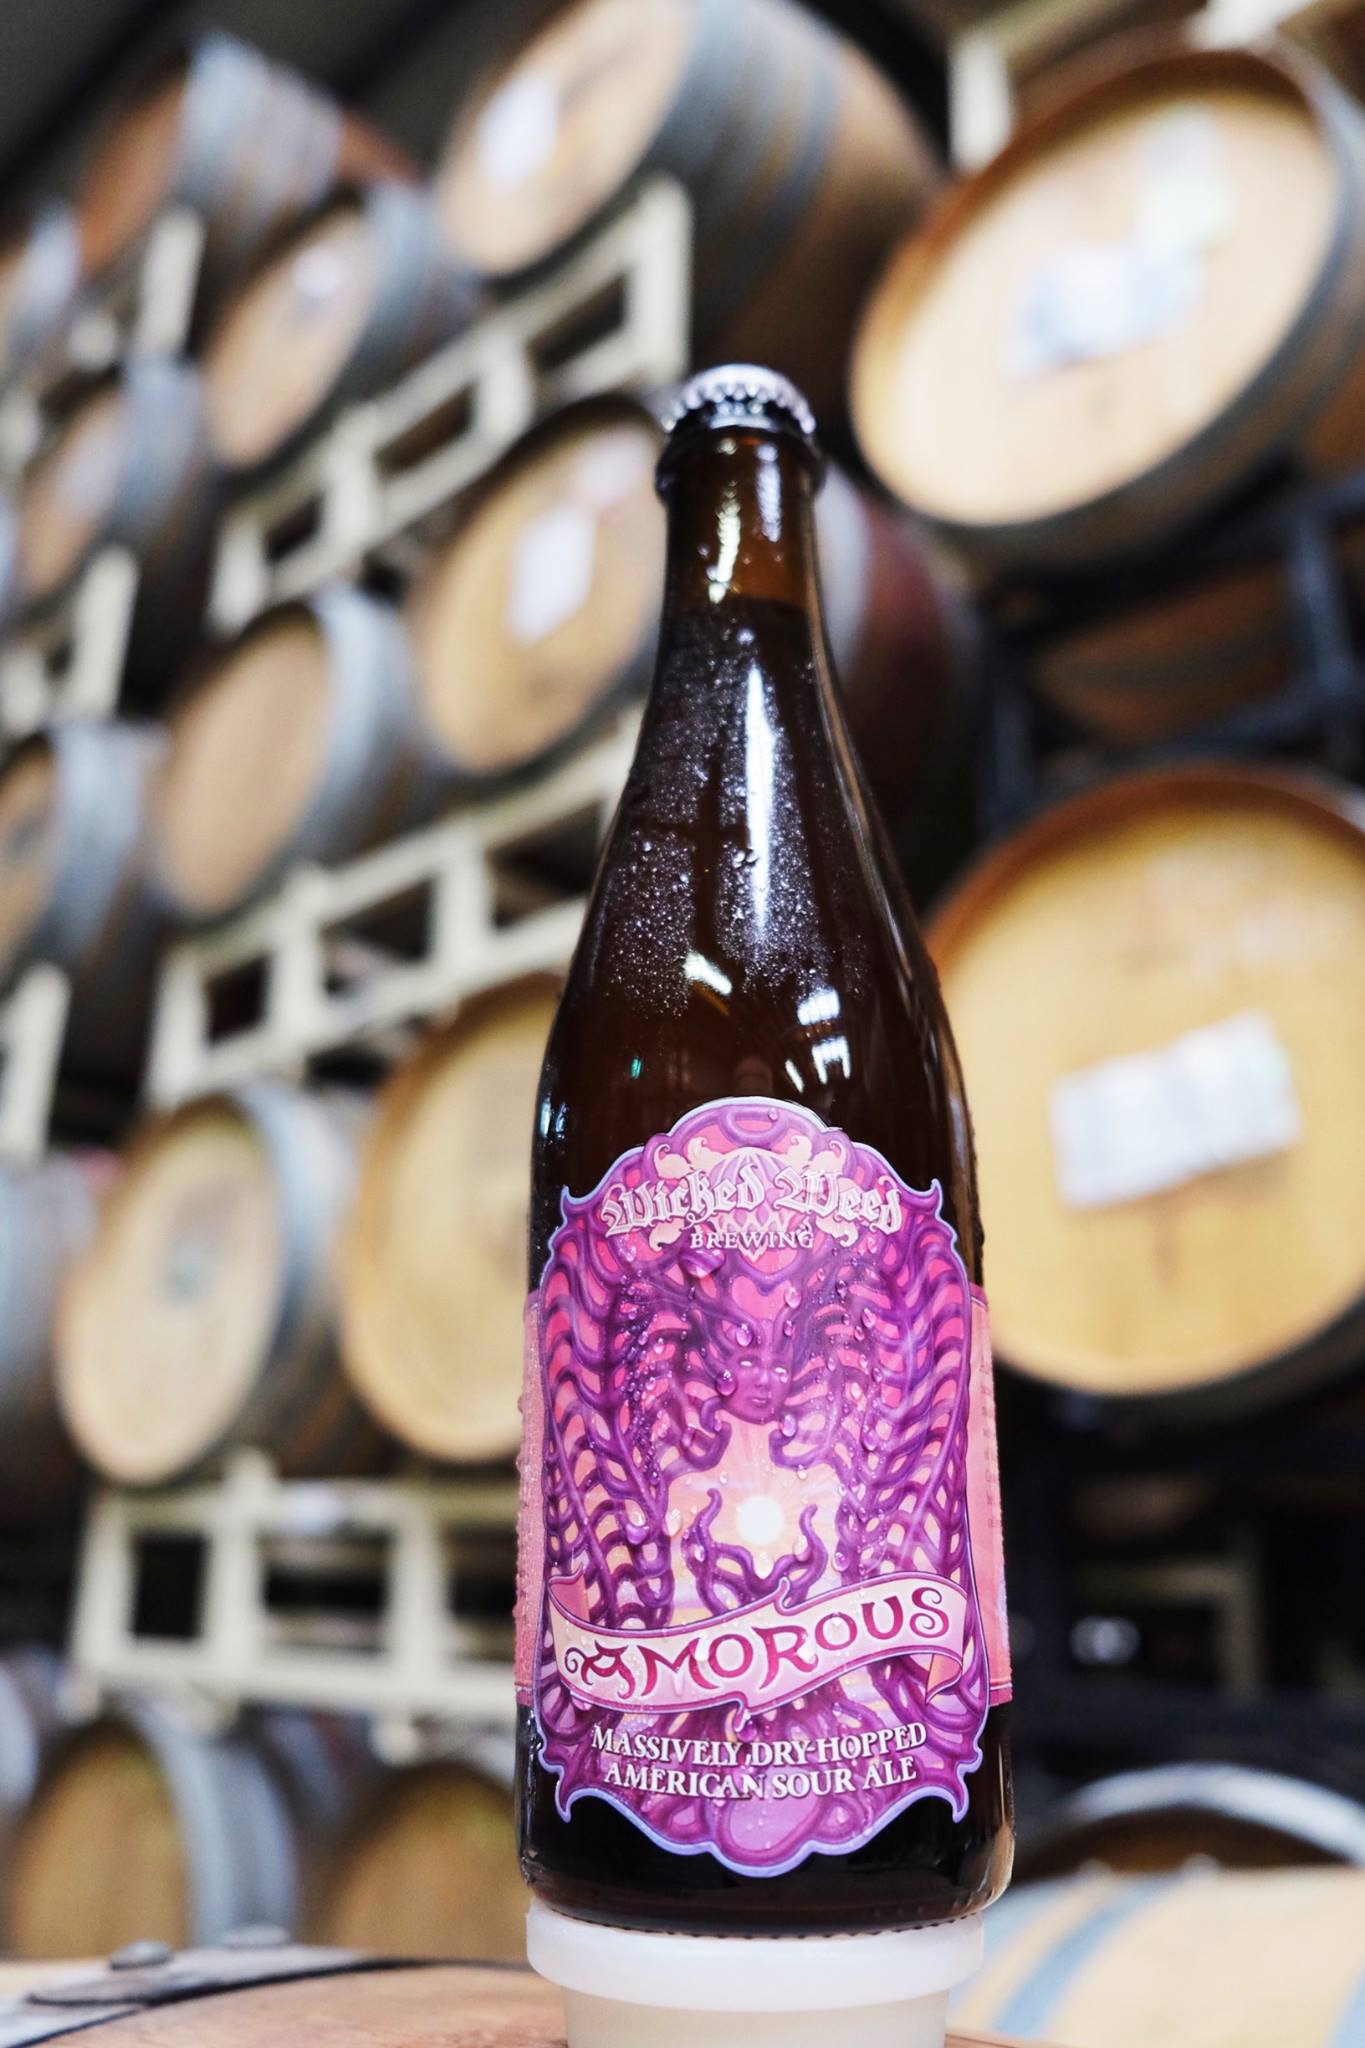 Wicked Weed Amorous